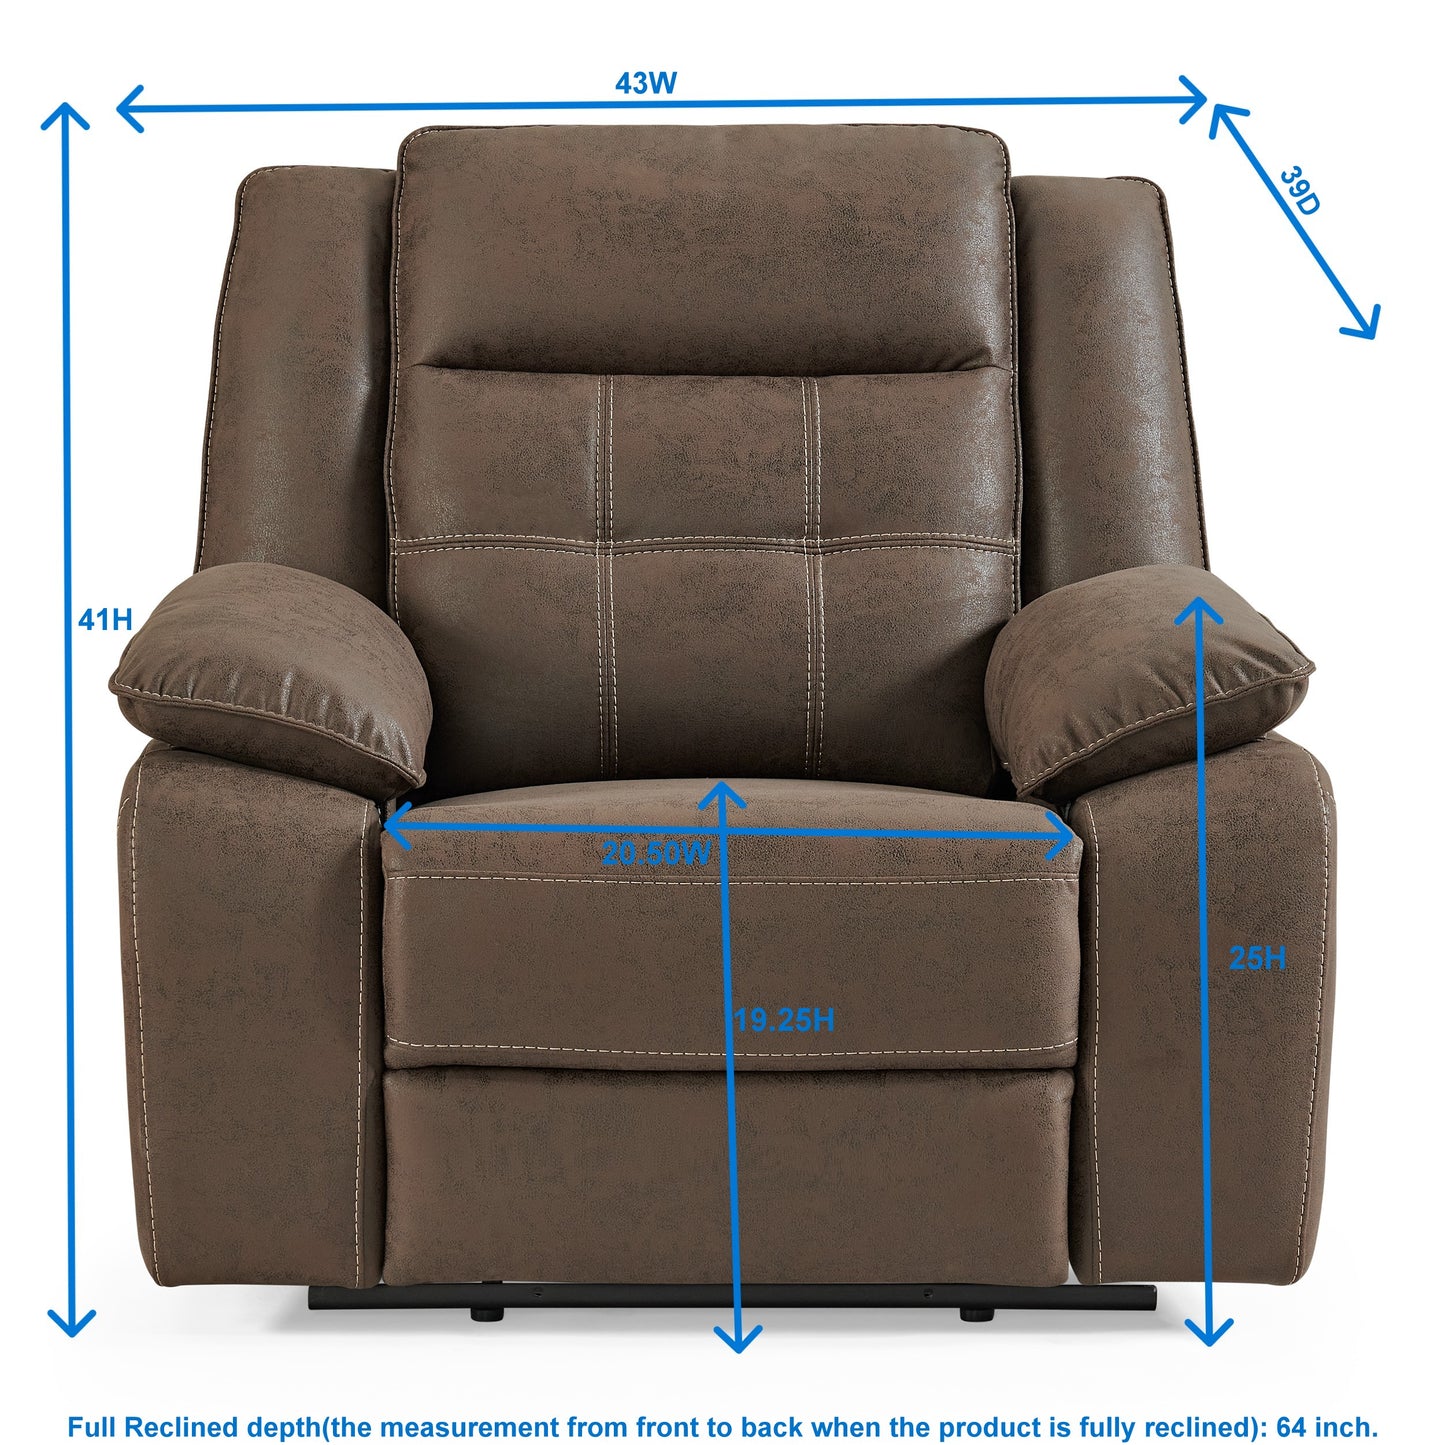 Lesley Transitional Manual Motion Recliner, Brown